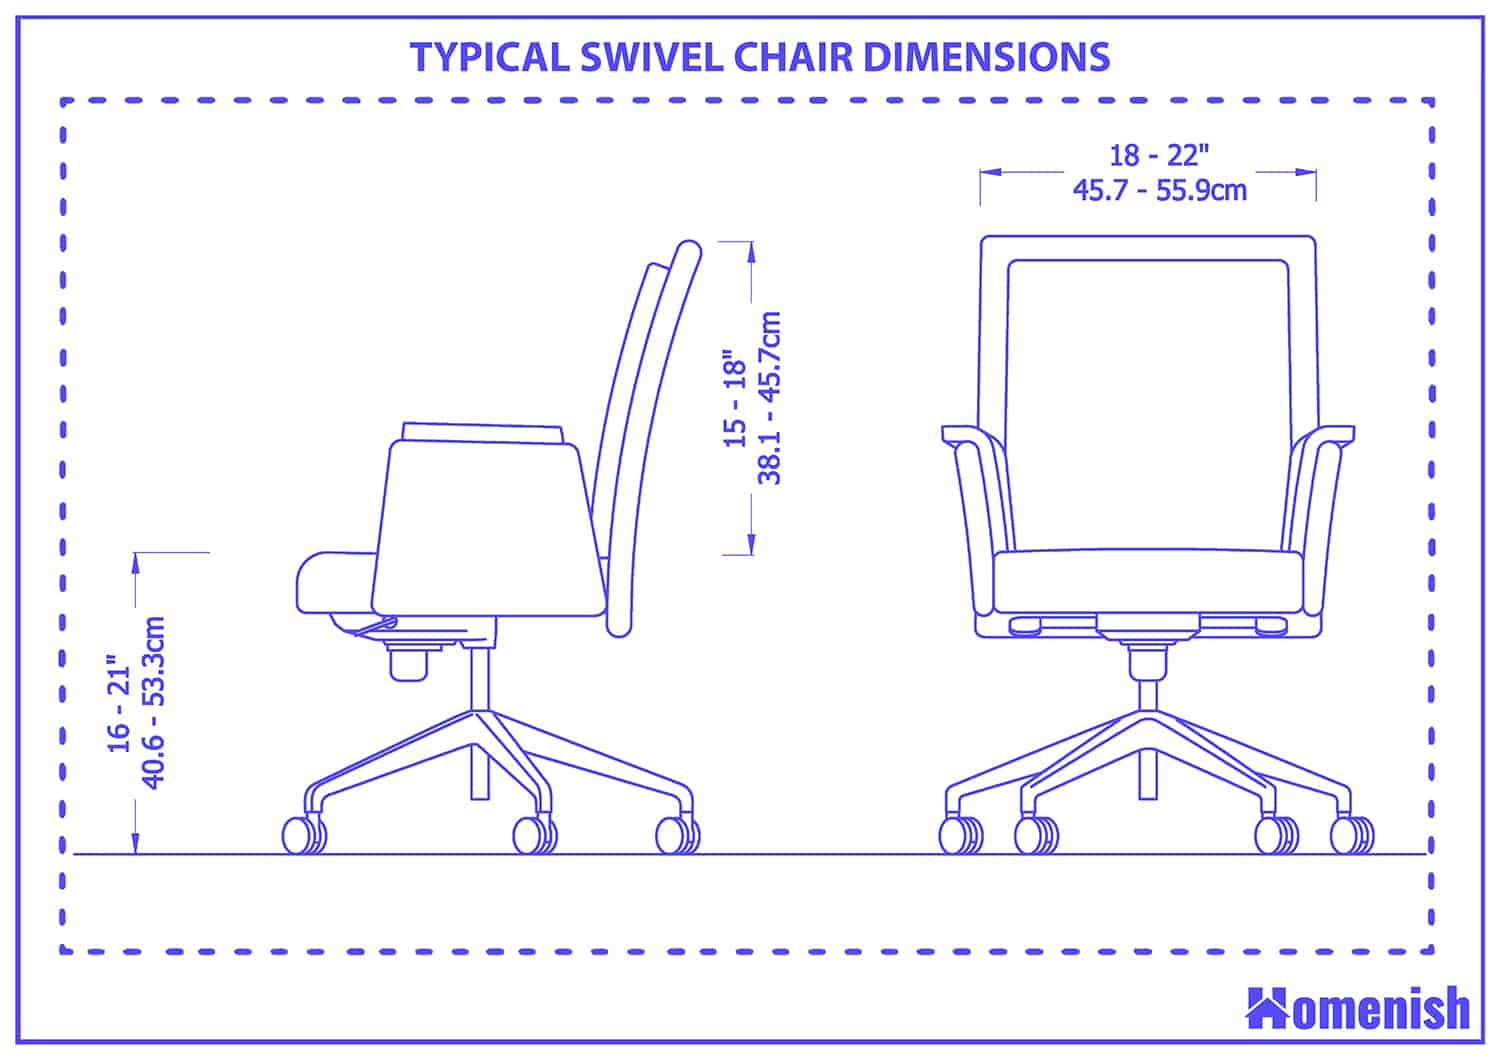 Typical swivel chair dimensions